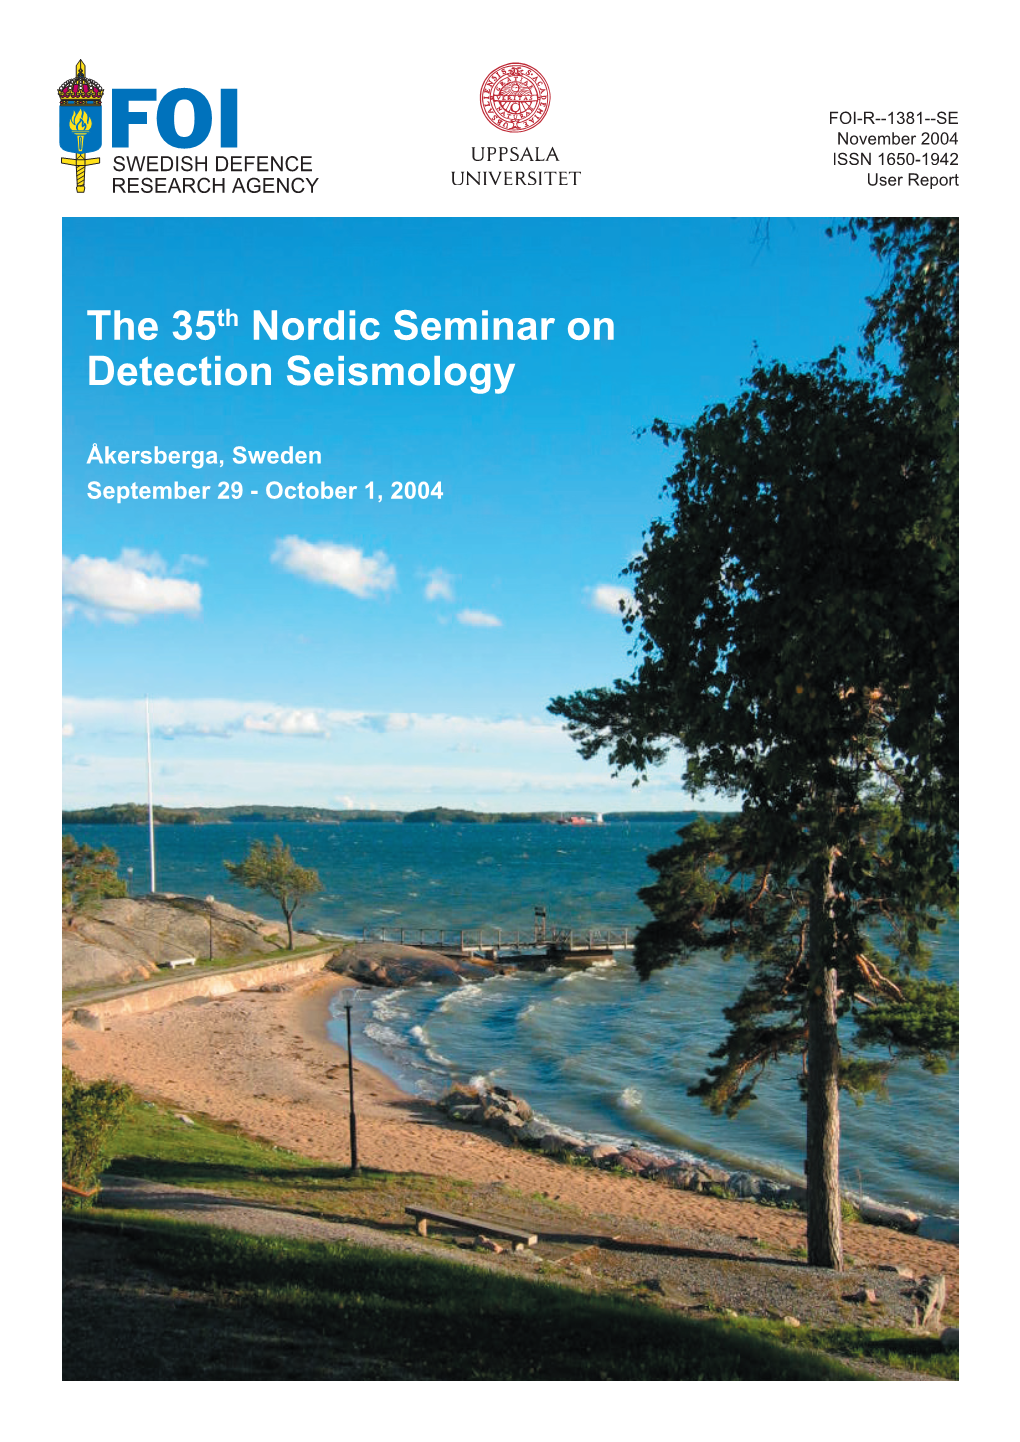 The 35Th Nordic Seminar on Detection Seismology